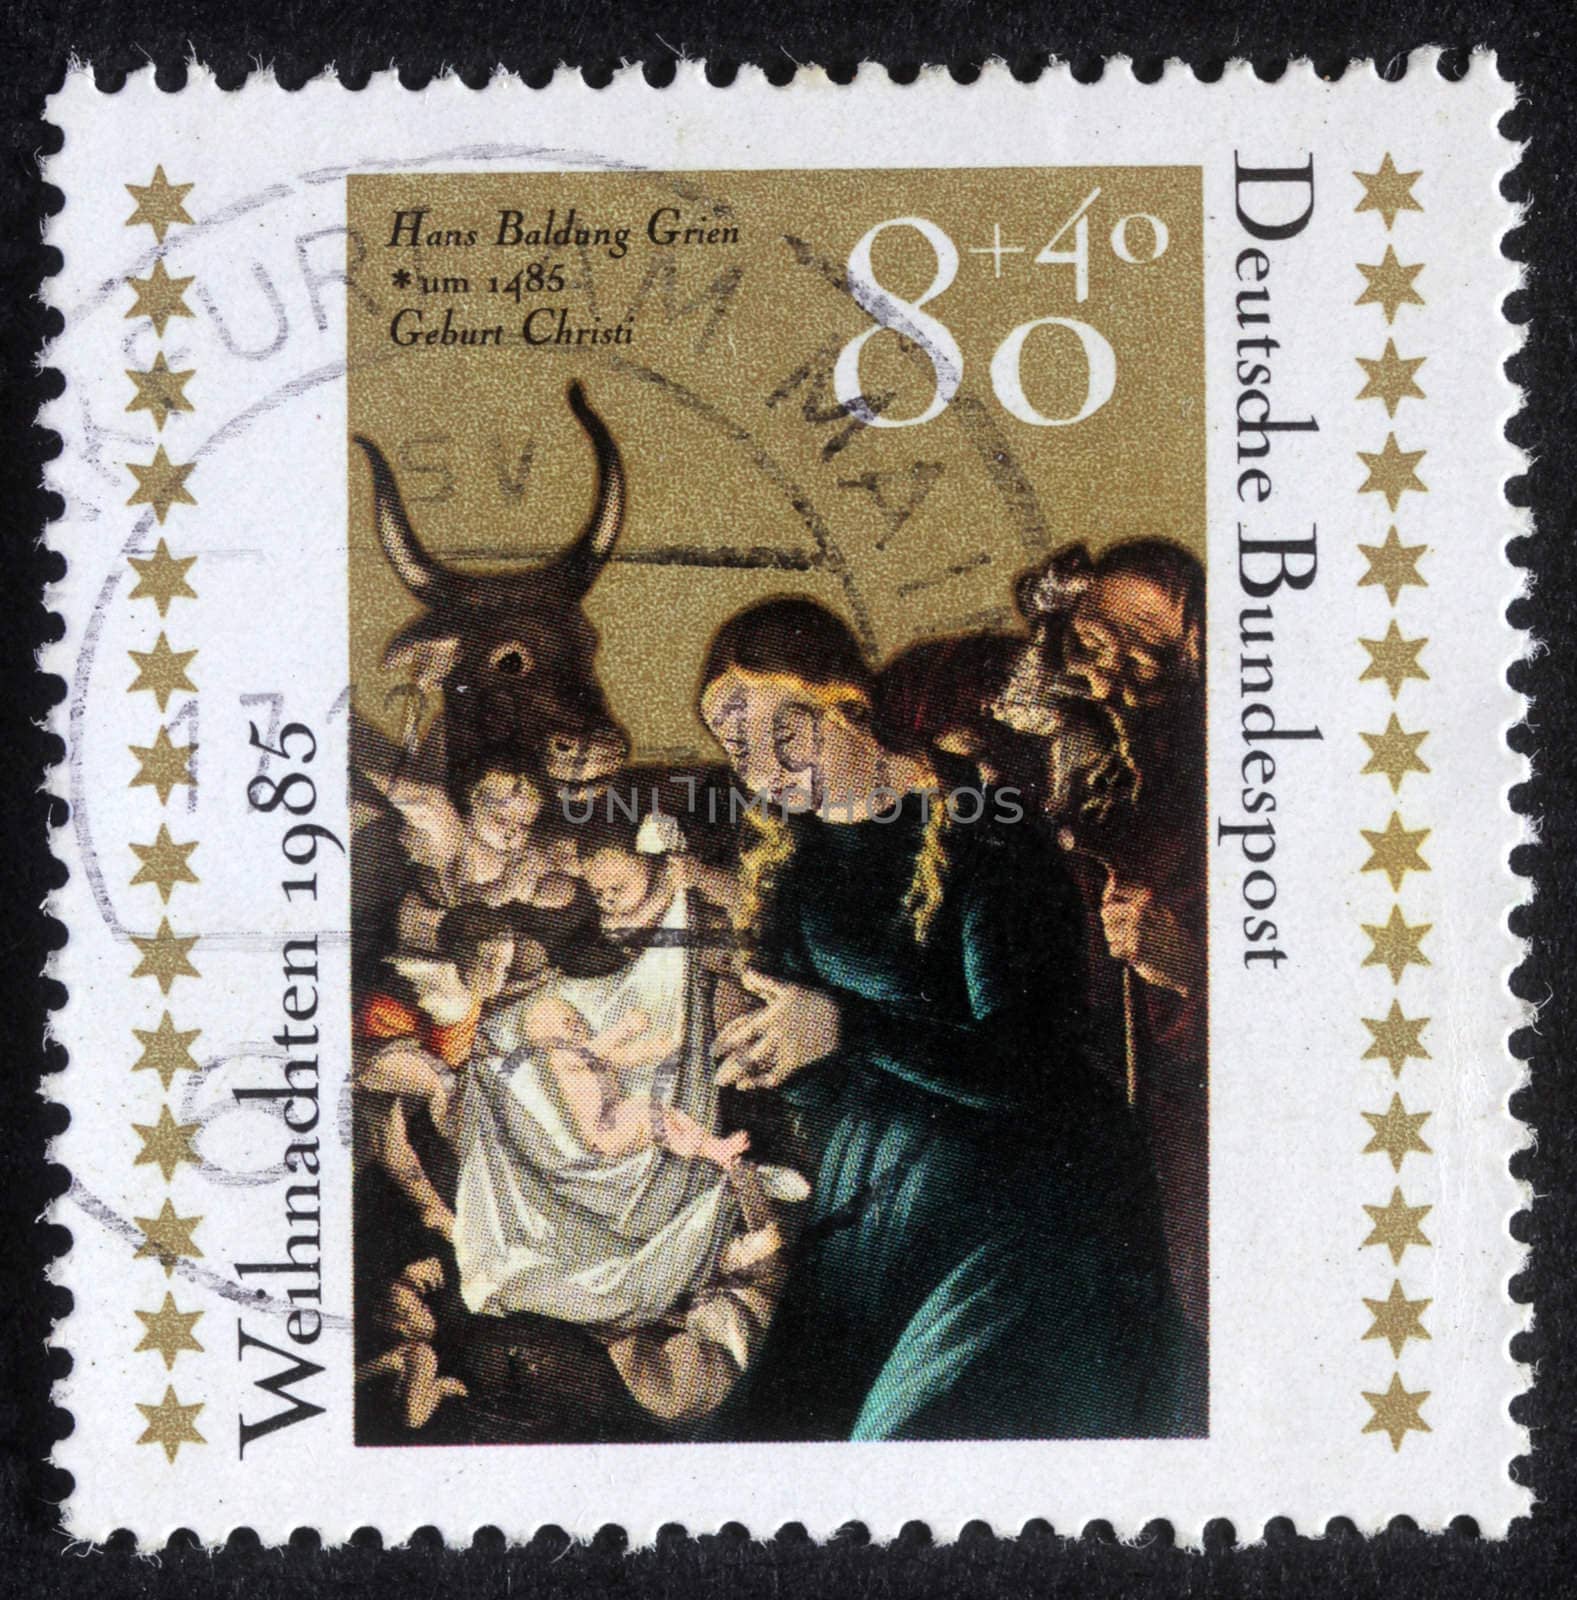 GERMANY - CIRCA 1985: A greeting Christmas stamp printed in the Germany shows Christmas Creche